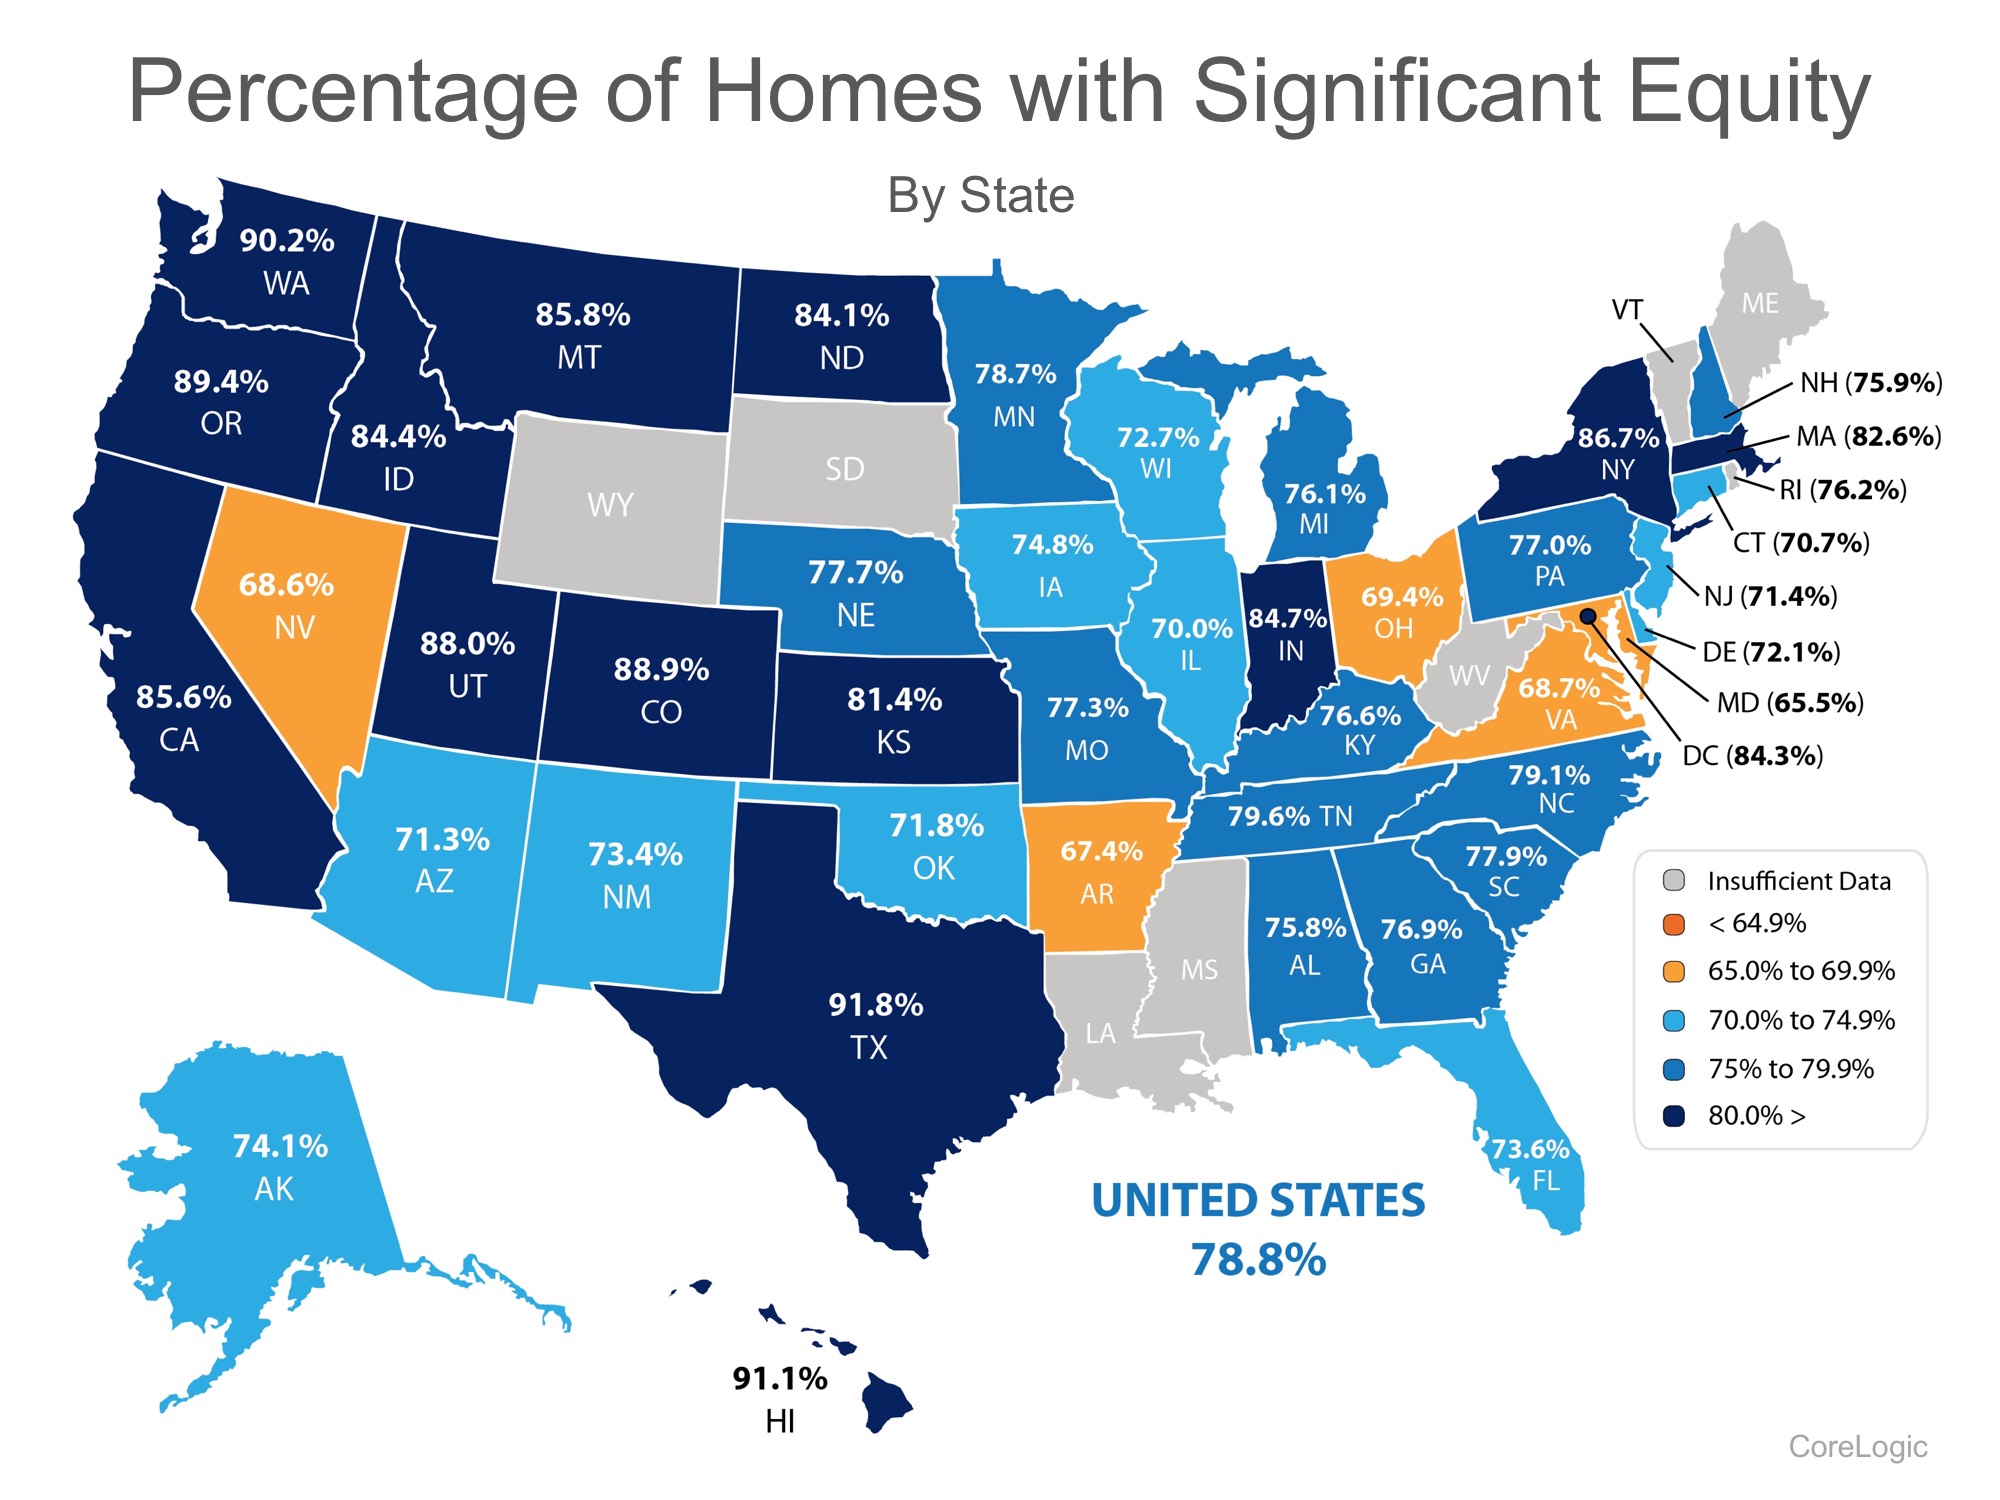 93.9% Of Homes in The US Have Positive Equity